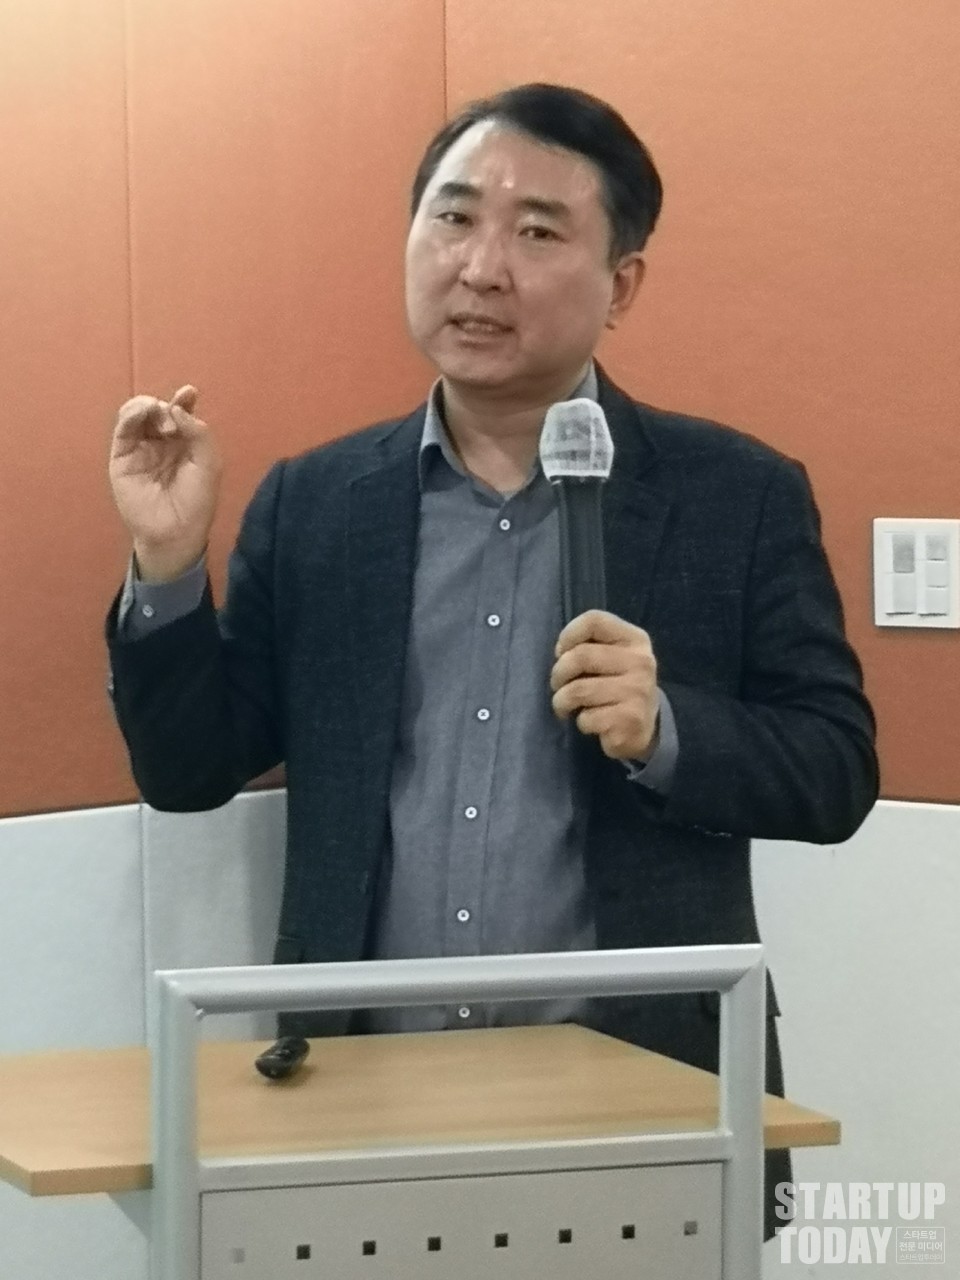 At the 263rd BTCN Venture Forum, Ahn Jung-soo, CEO of Pitch Solution, attended and held an investment briefing.